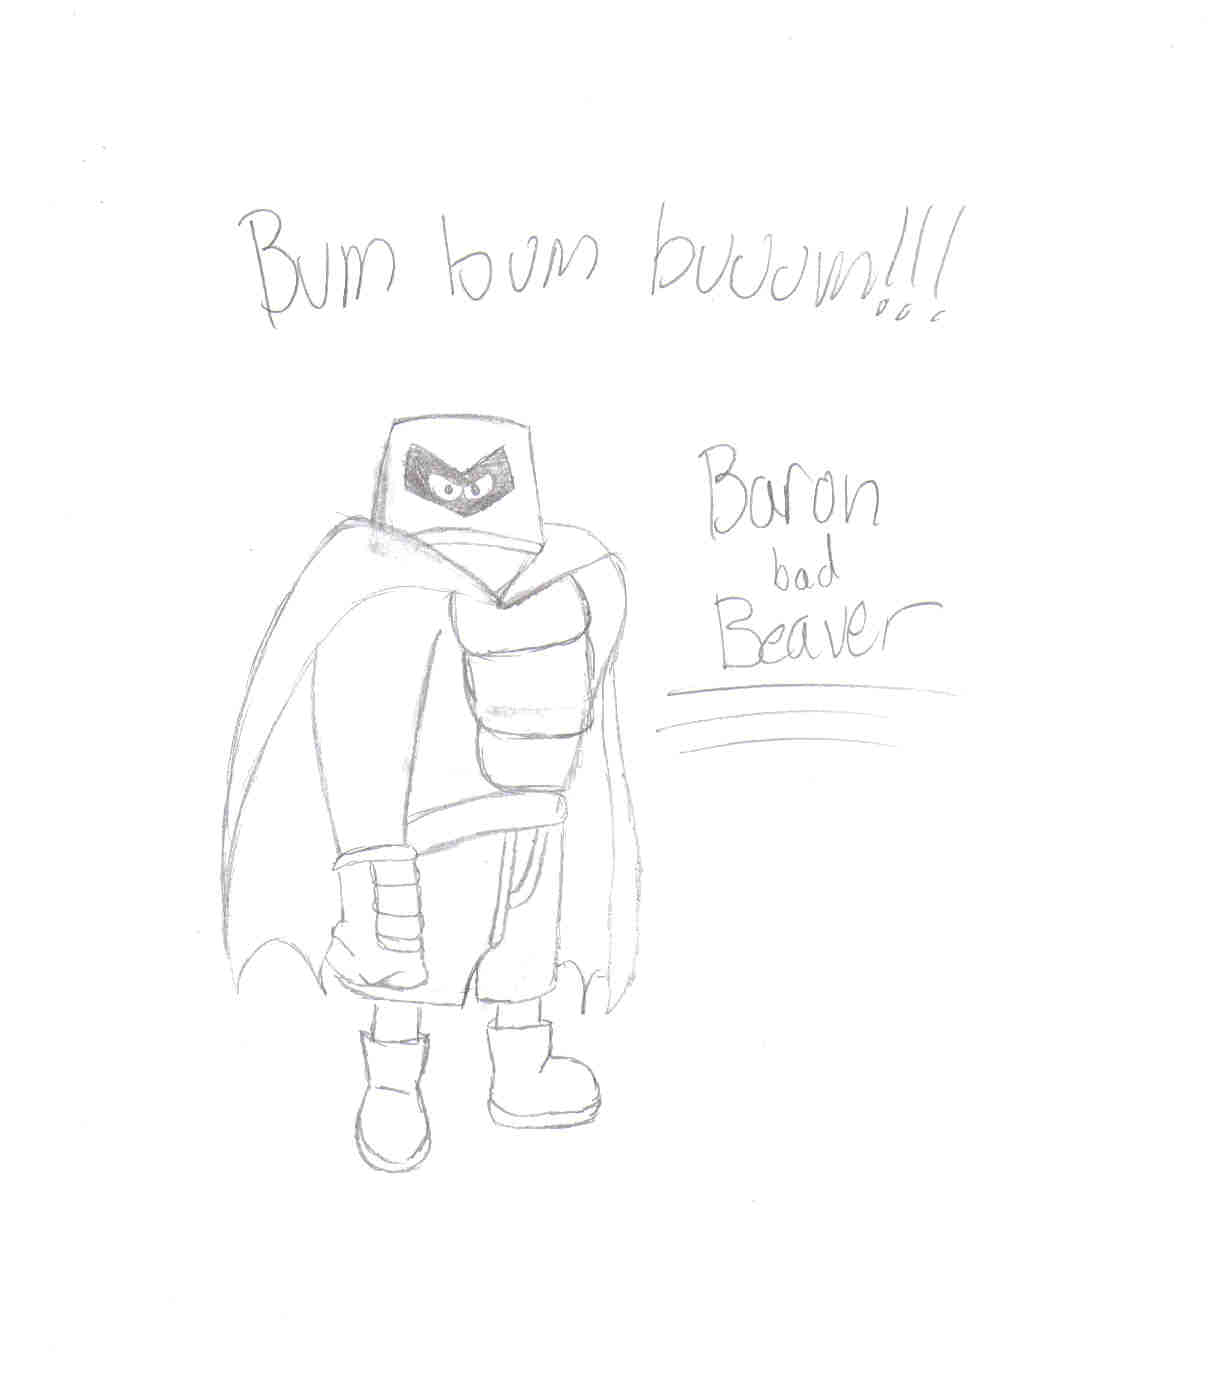 First attempt at Baron Bad Beaver by orchid